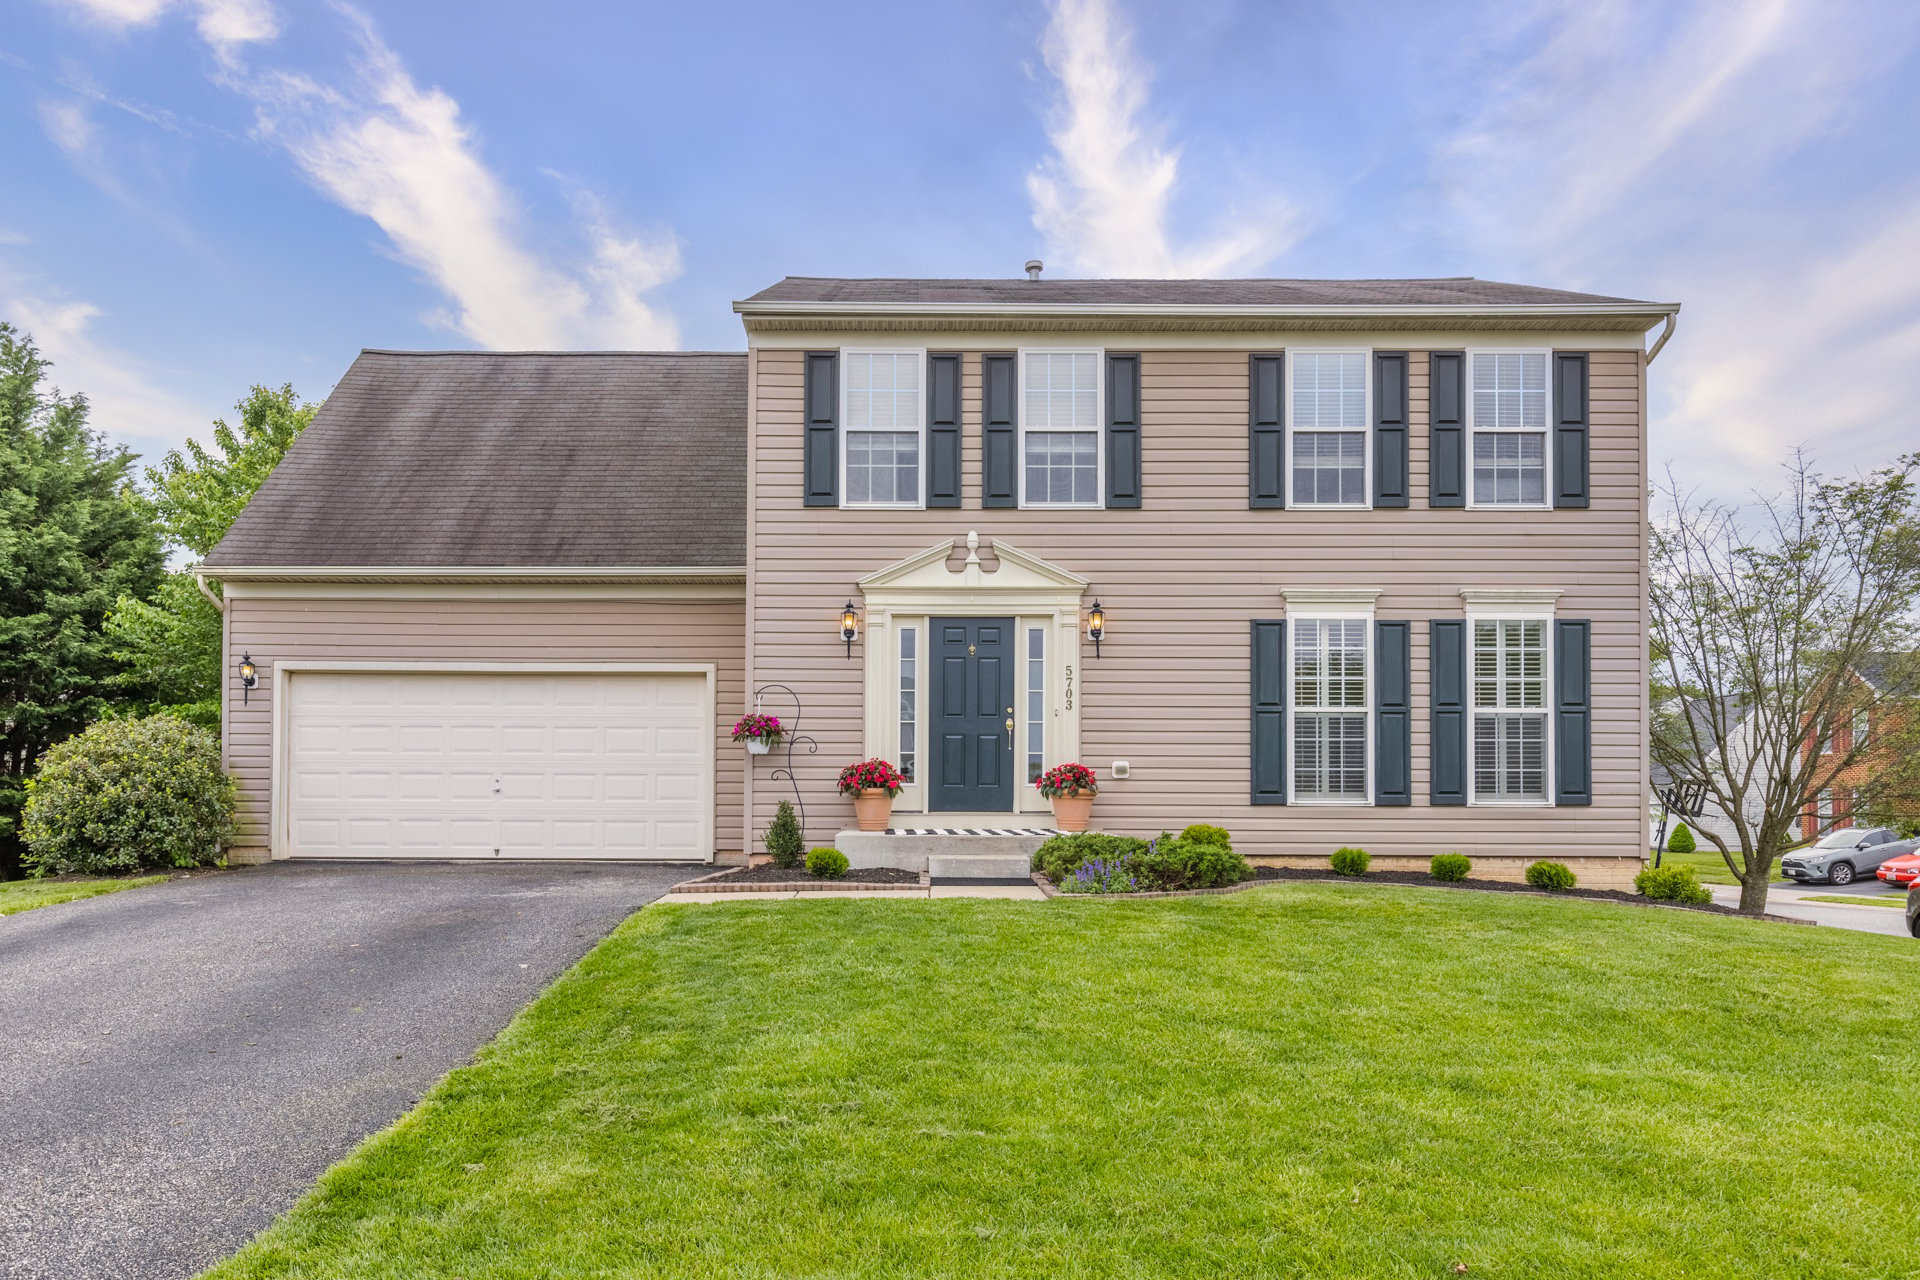 SOLD / 5703 New Forge Rd / White Marsh MD 21162